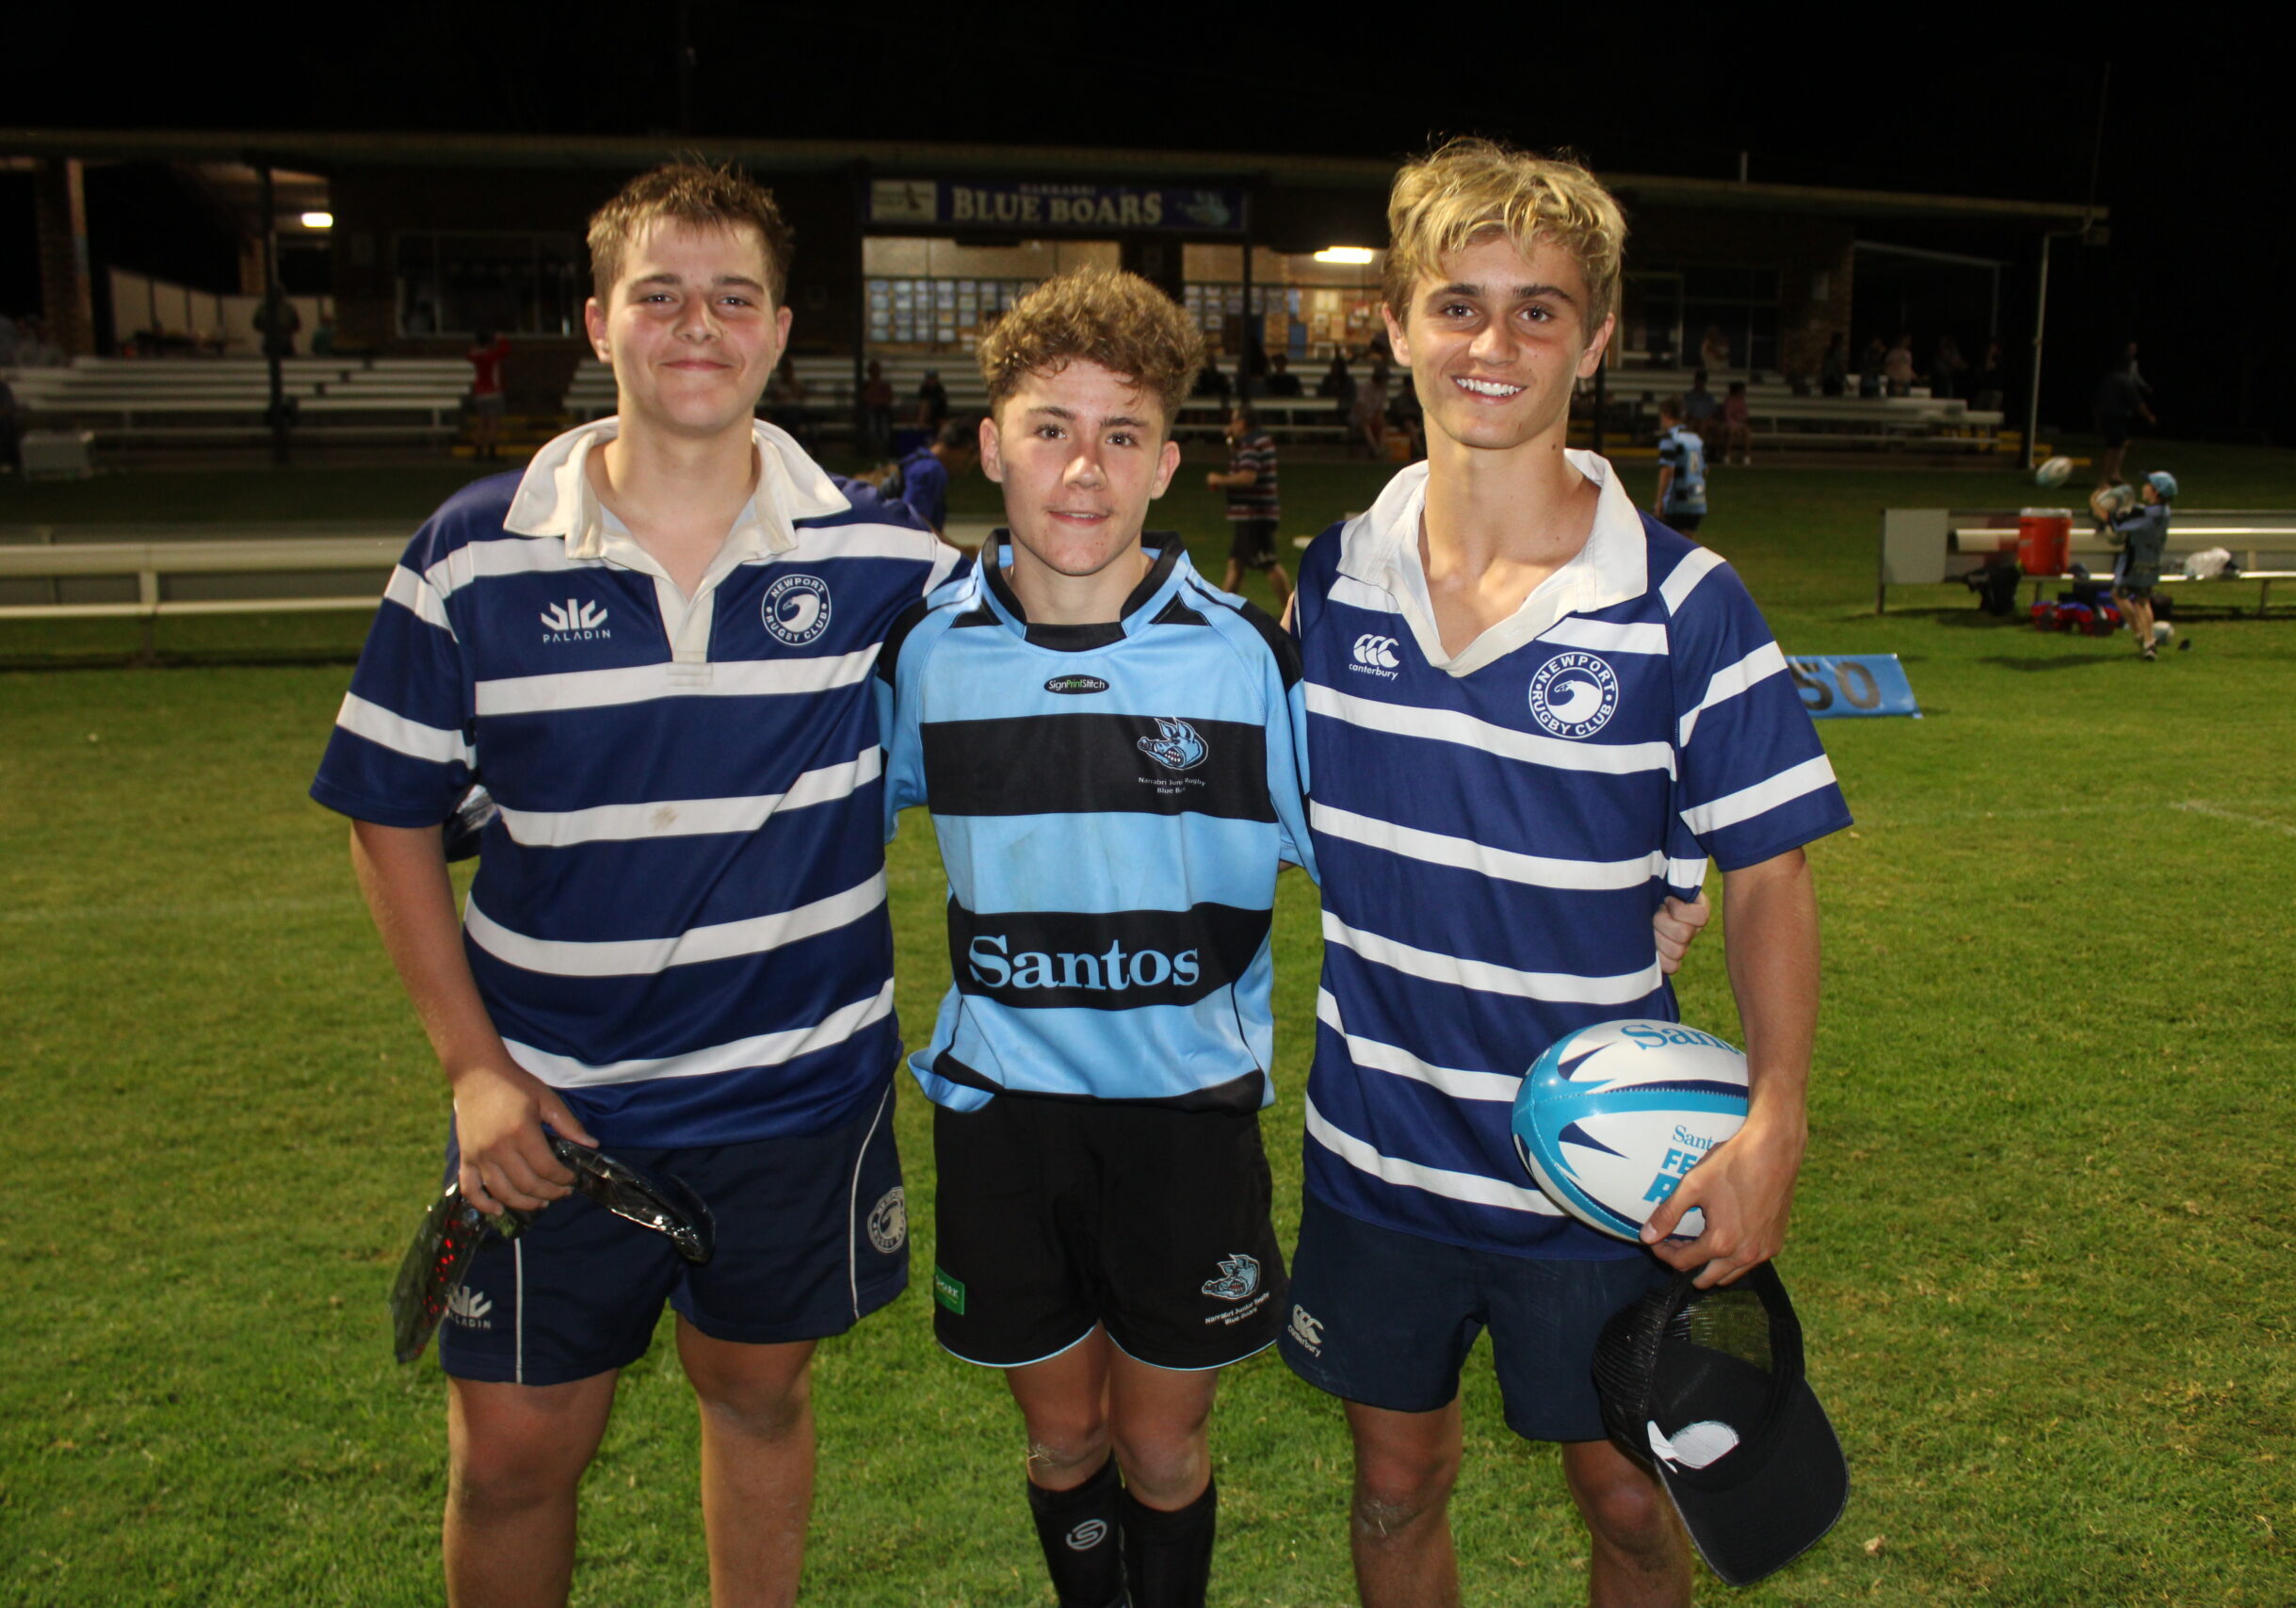 Narrabri Junior Rugby Club hosts Newport under-15s during their country road trip